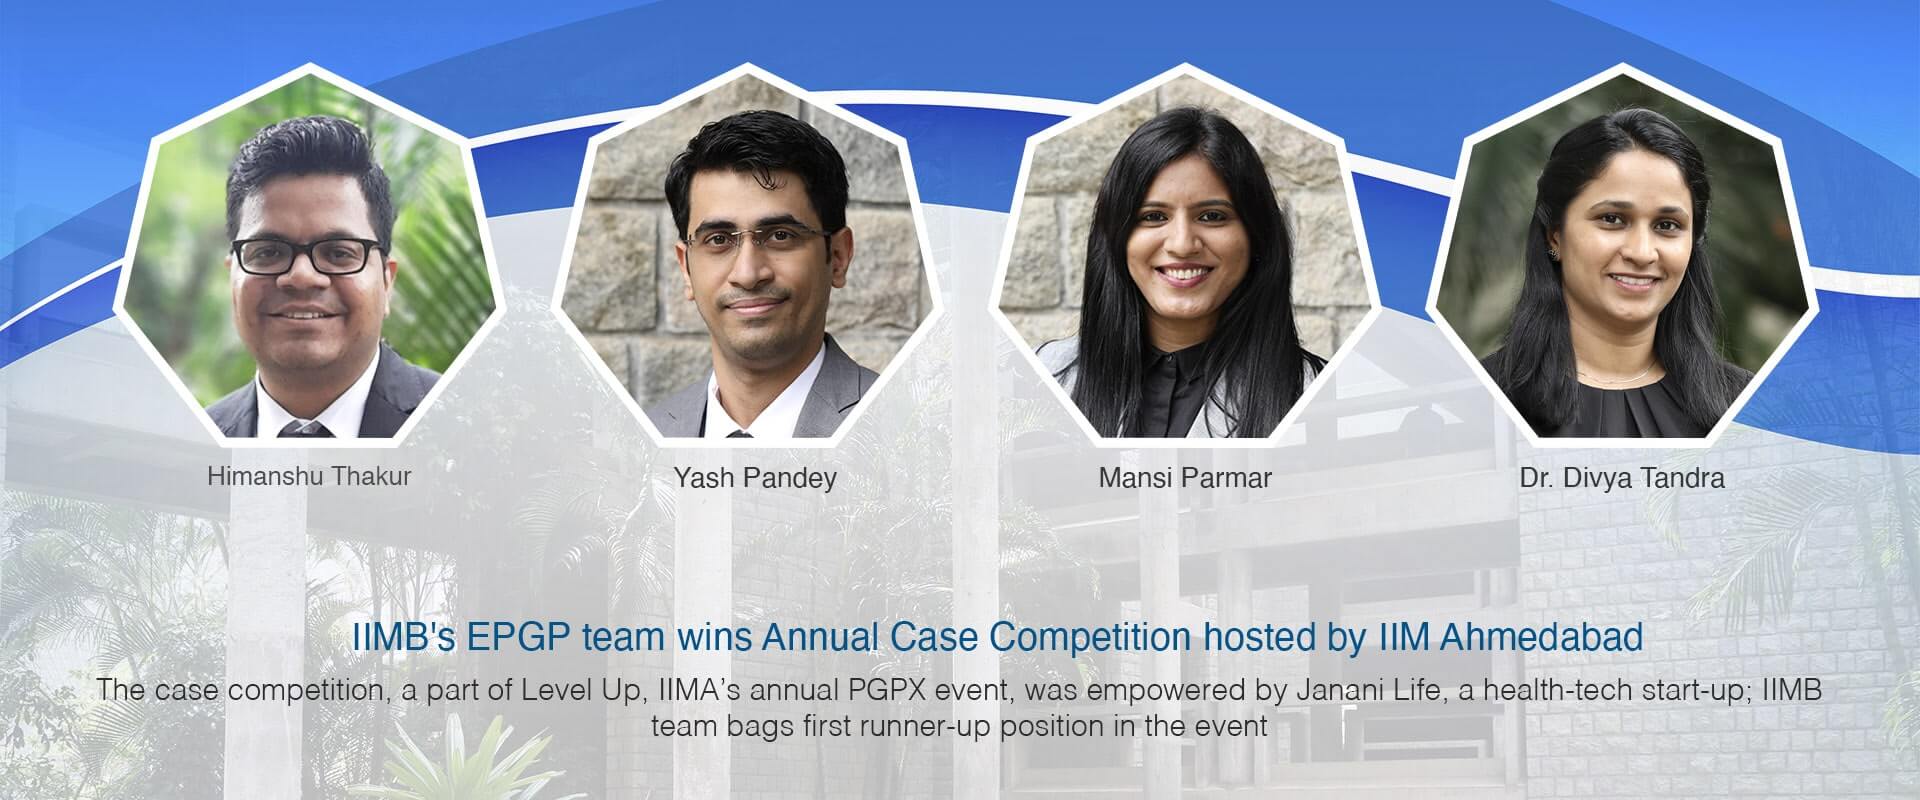 IIMB's EPGP team wins Annual Case Competition hosted by IIM Ahmedabad 